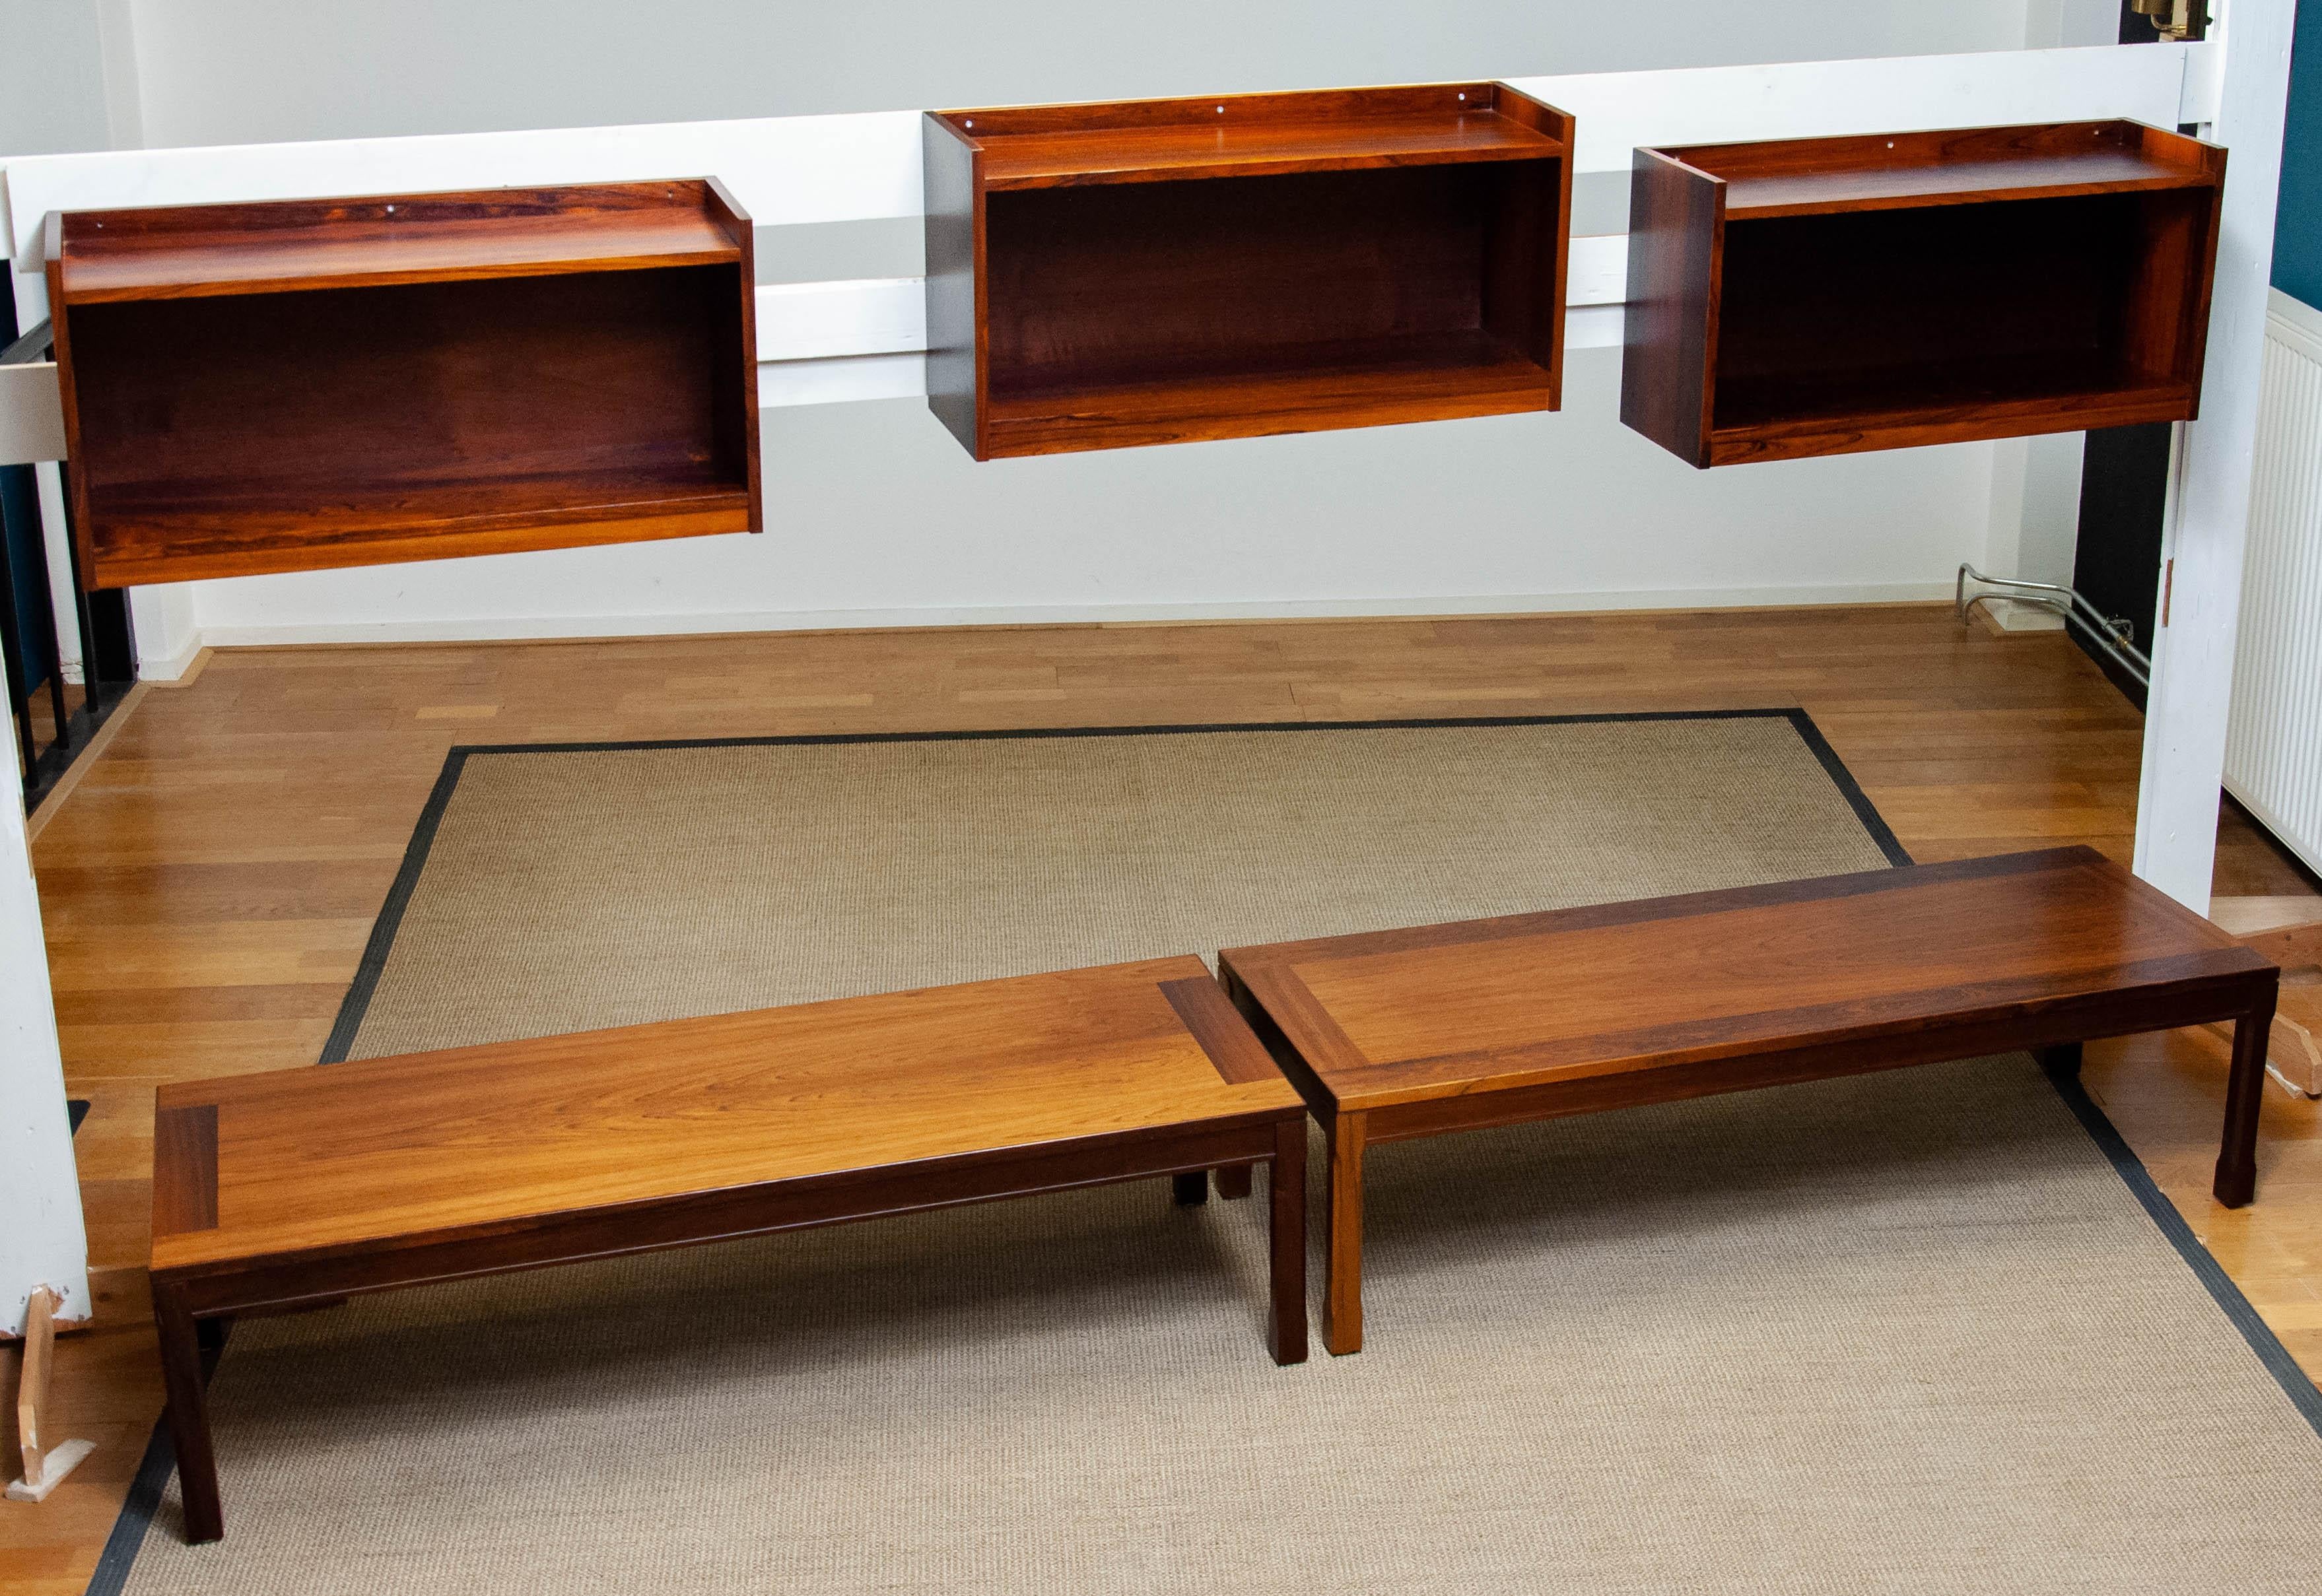 60s Hovering Rosewood Wall Mounted Cabinets Shelfs With Two Matching Side Tables In Good Condition For Sale In Silvolde, Gelderland